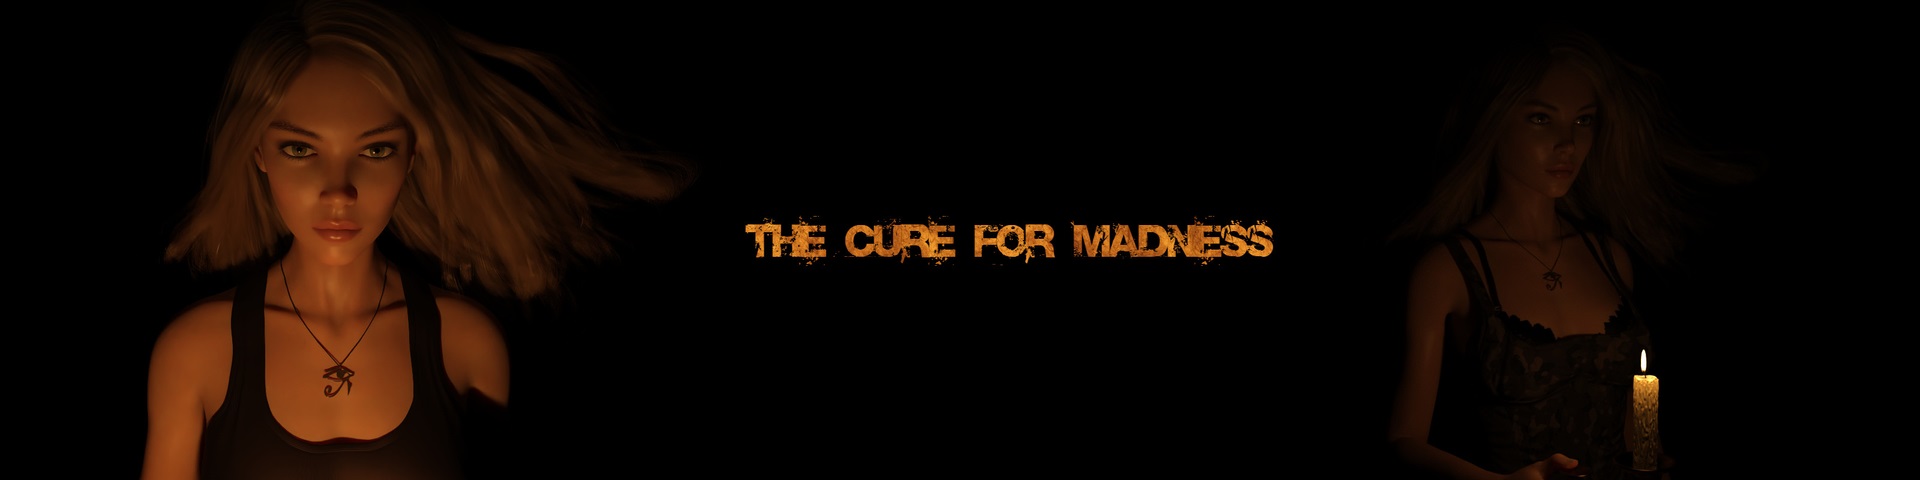 The Cure for Madness1.jpg